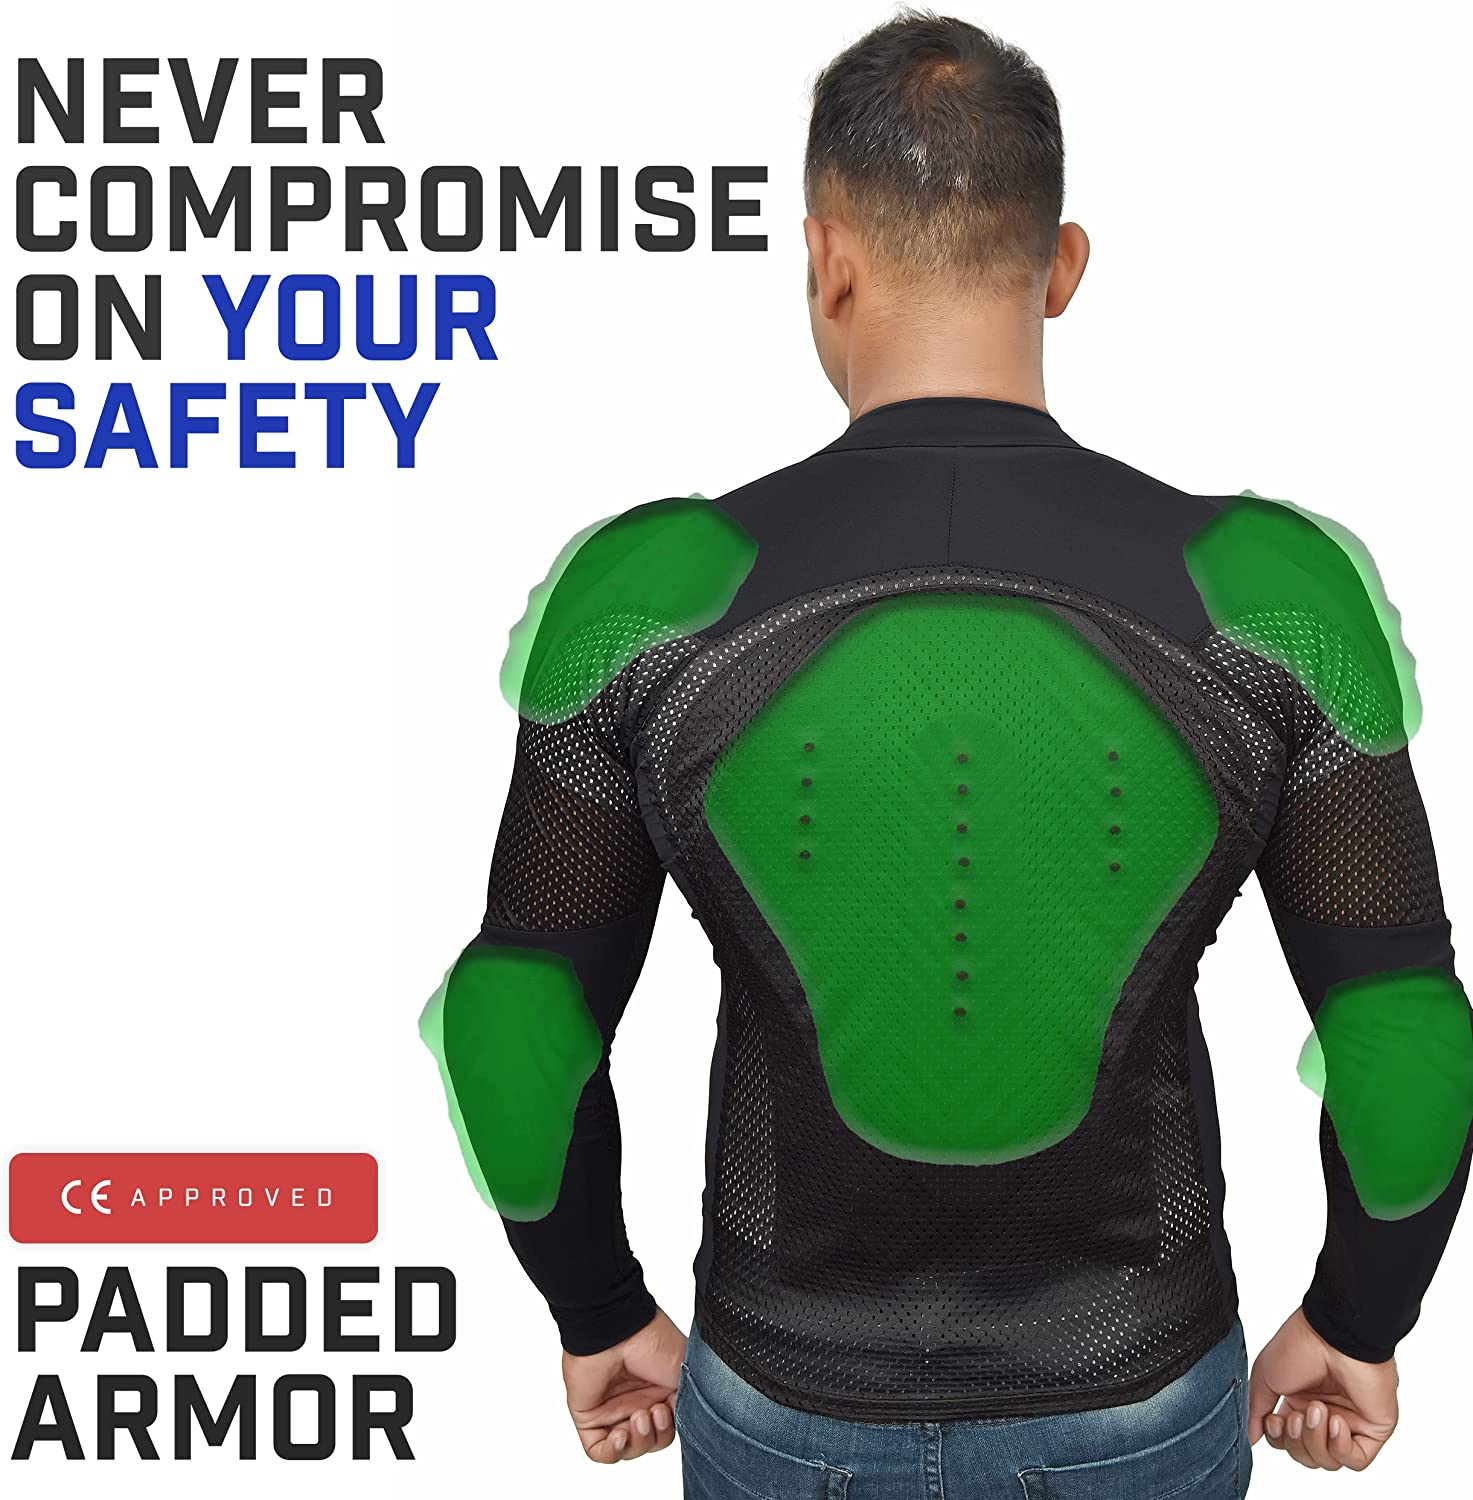 Choose body armor that will provide the best protection for your type of mountain biking.